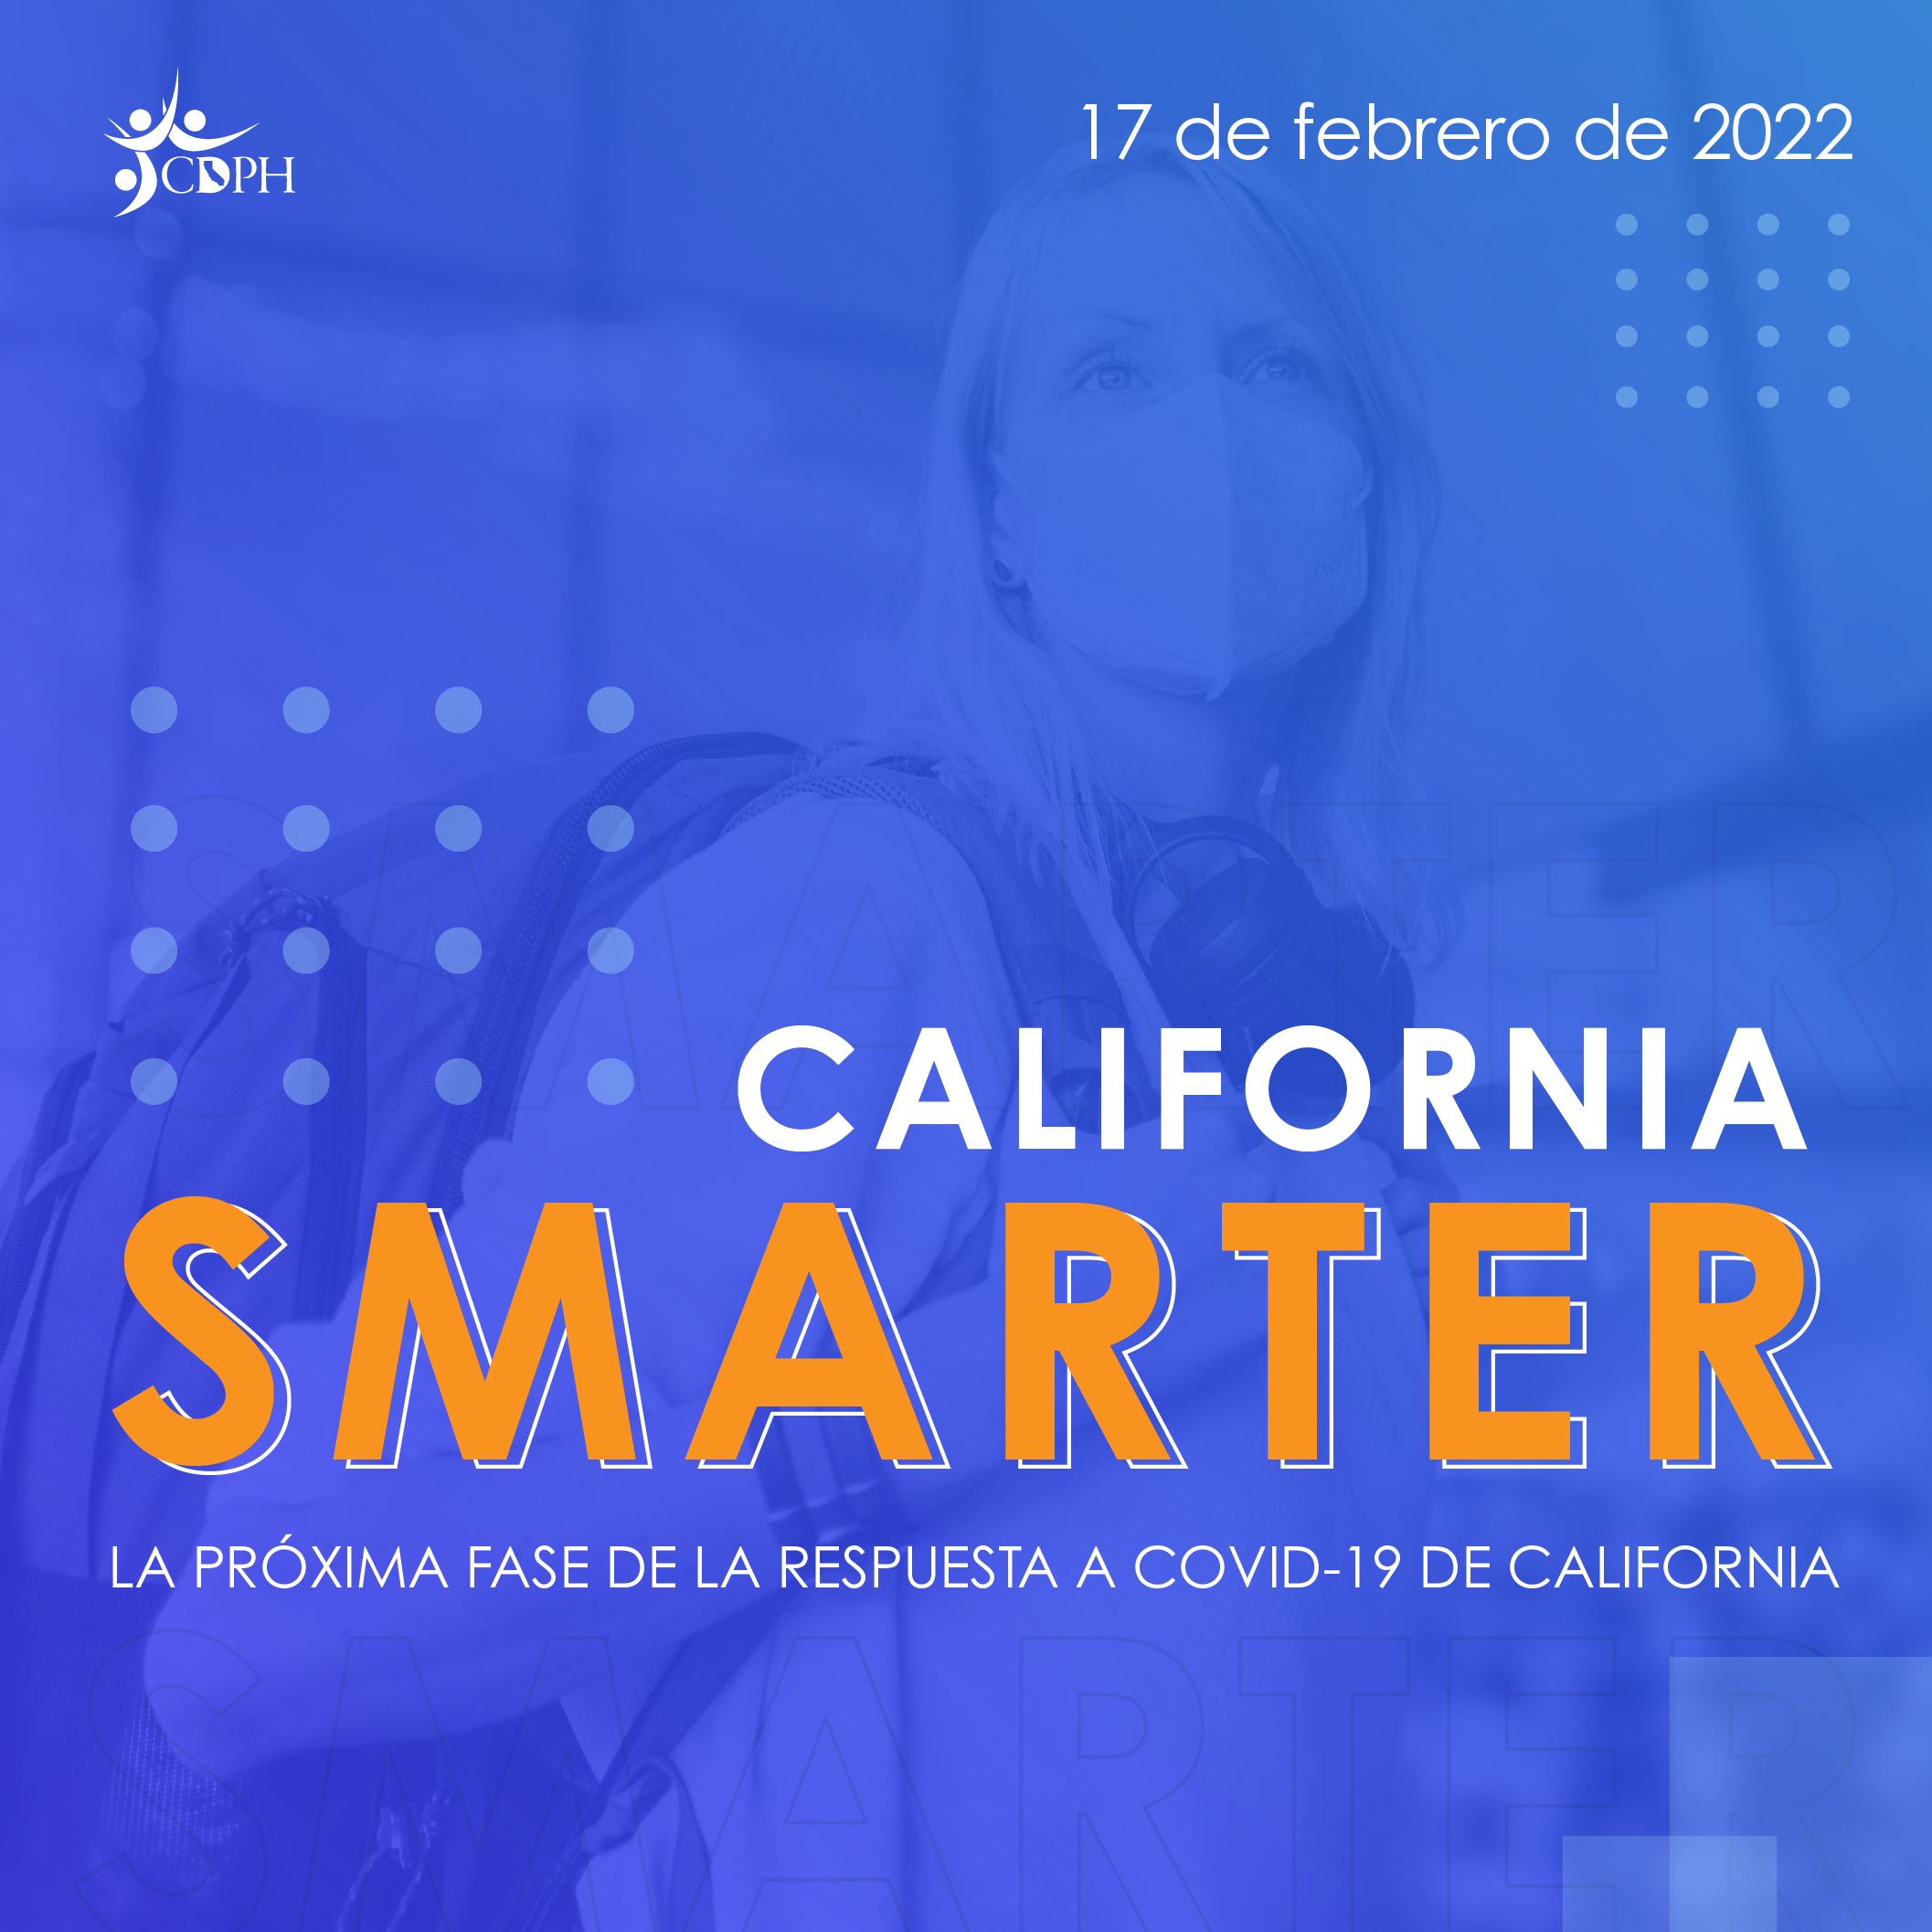 California SMARTER. The next phase of CA COVID-19 response